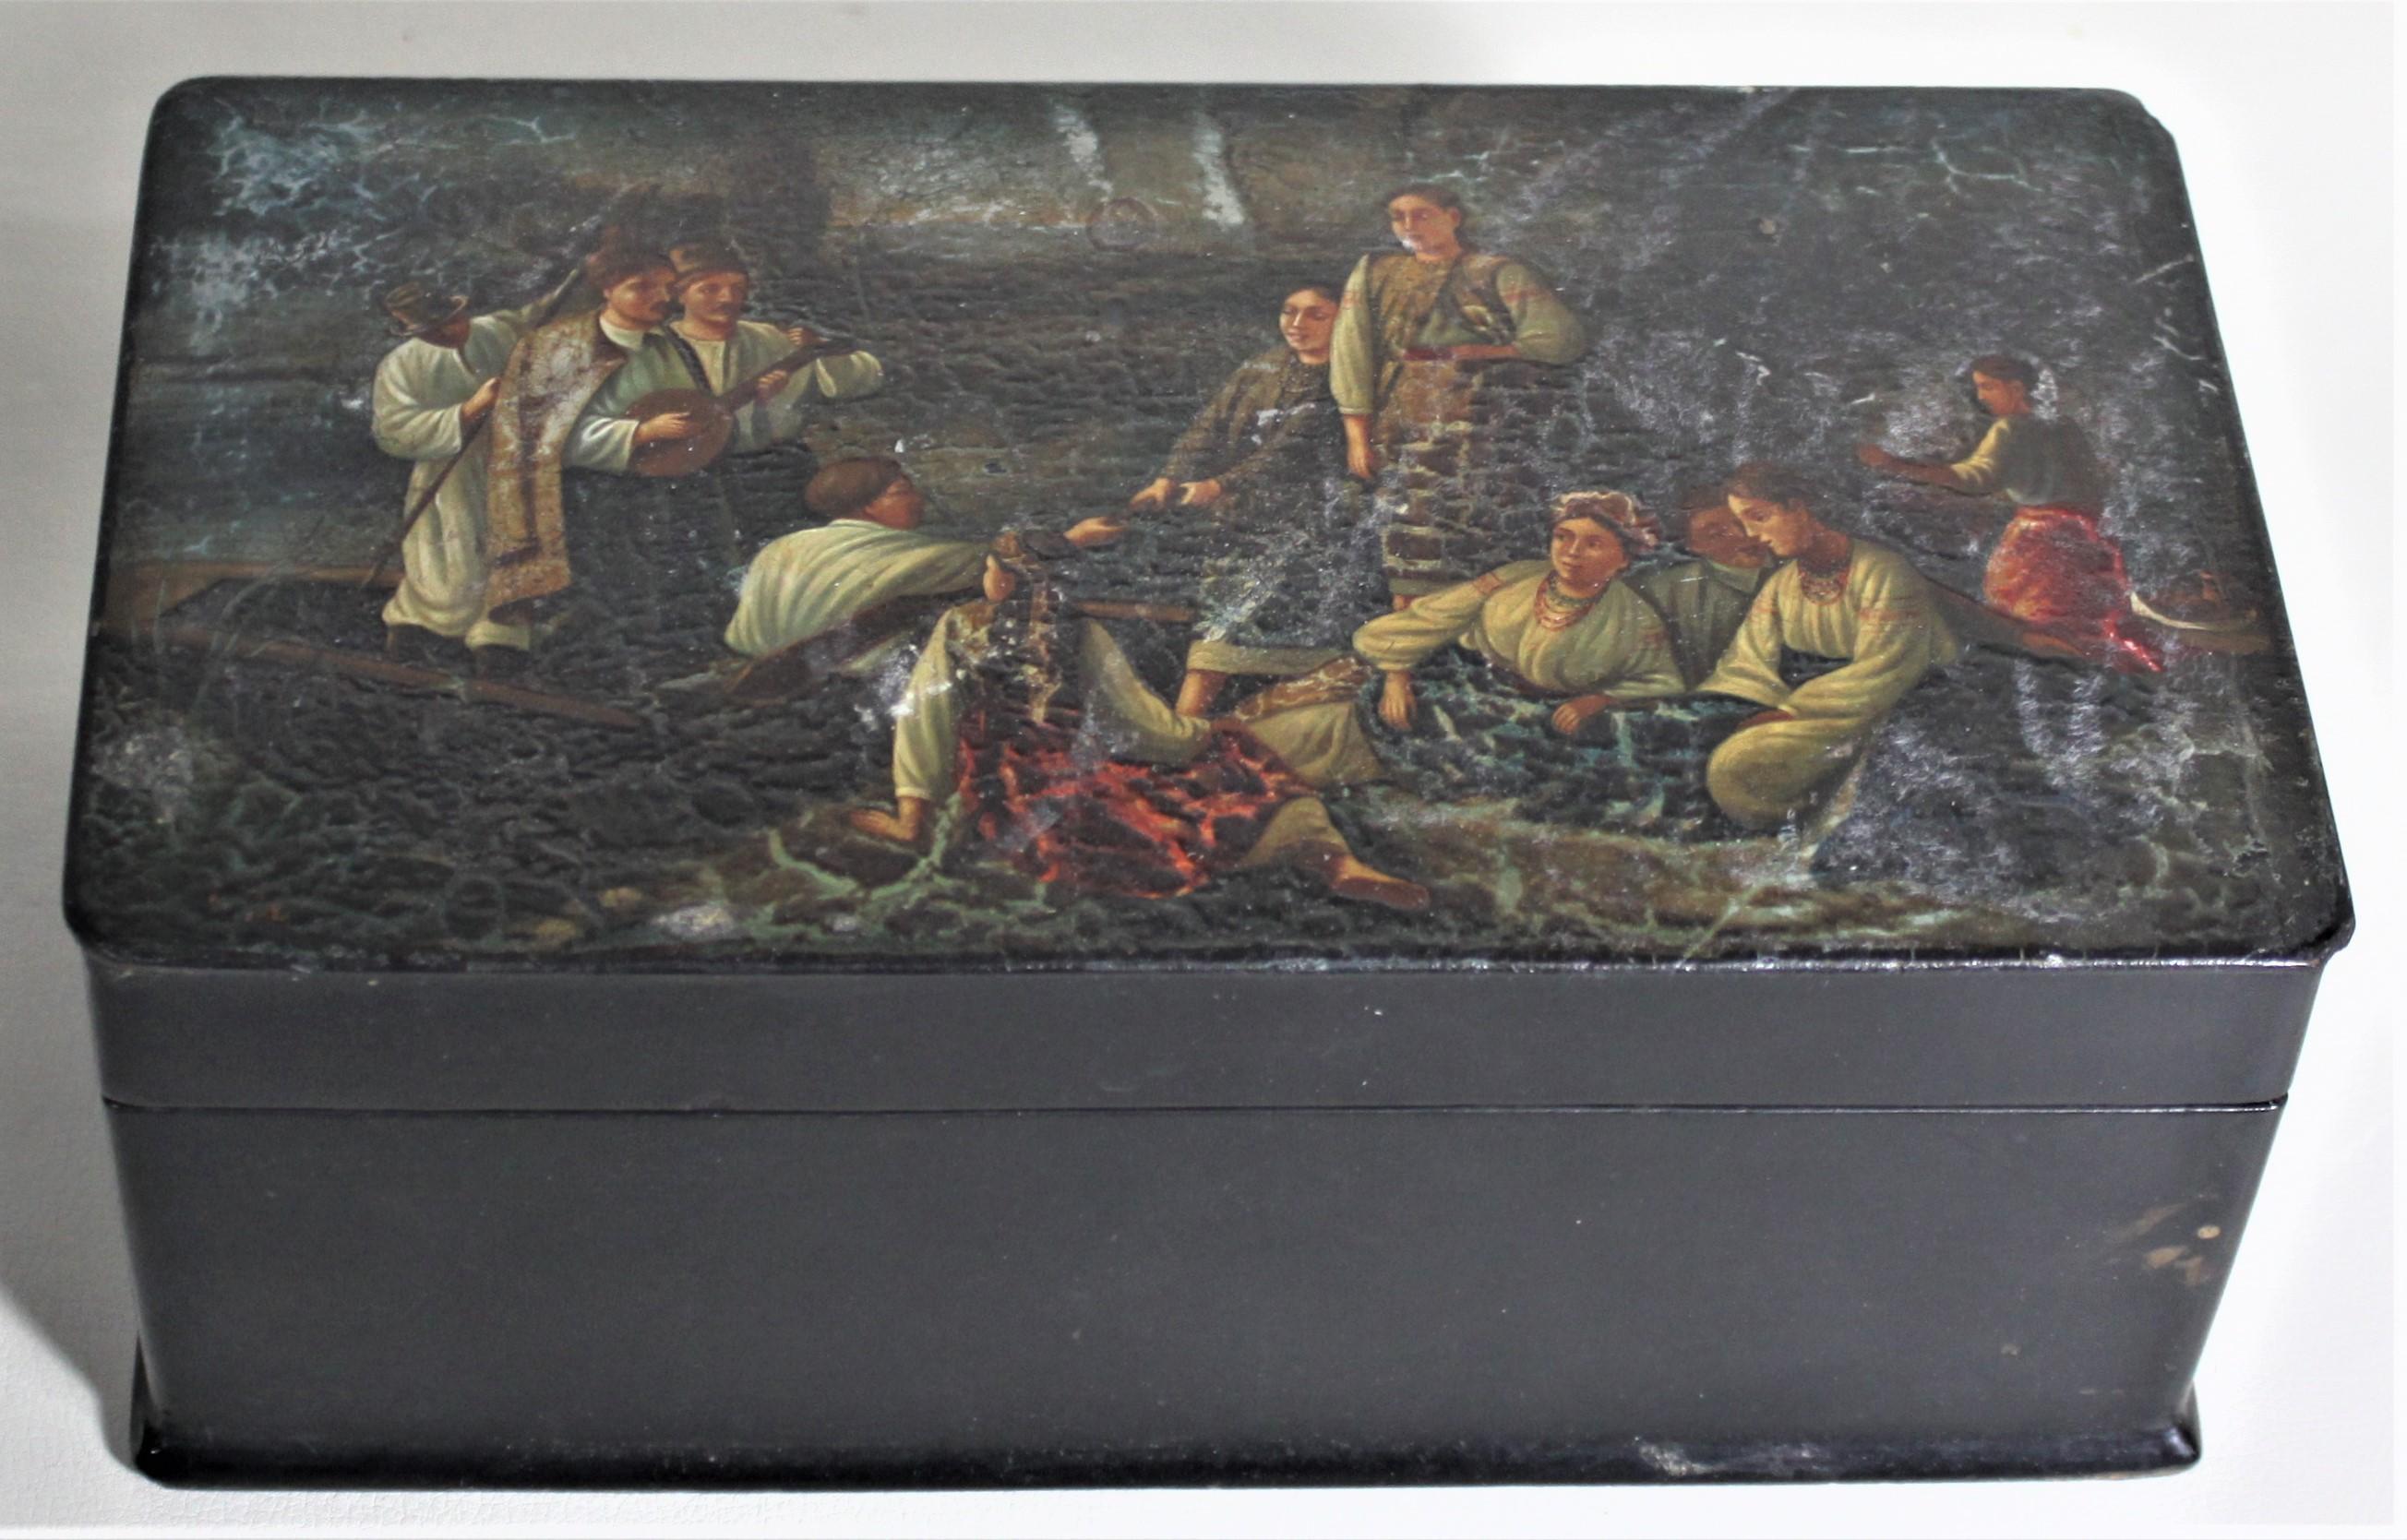 This antique wooden box is unmarked and unsigned, but believed to have been made in Russia in circa 1890. The top of the box portrays a vignette of a shore scene where several men in a small boat pay a visit to several women on the shore. The entire